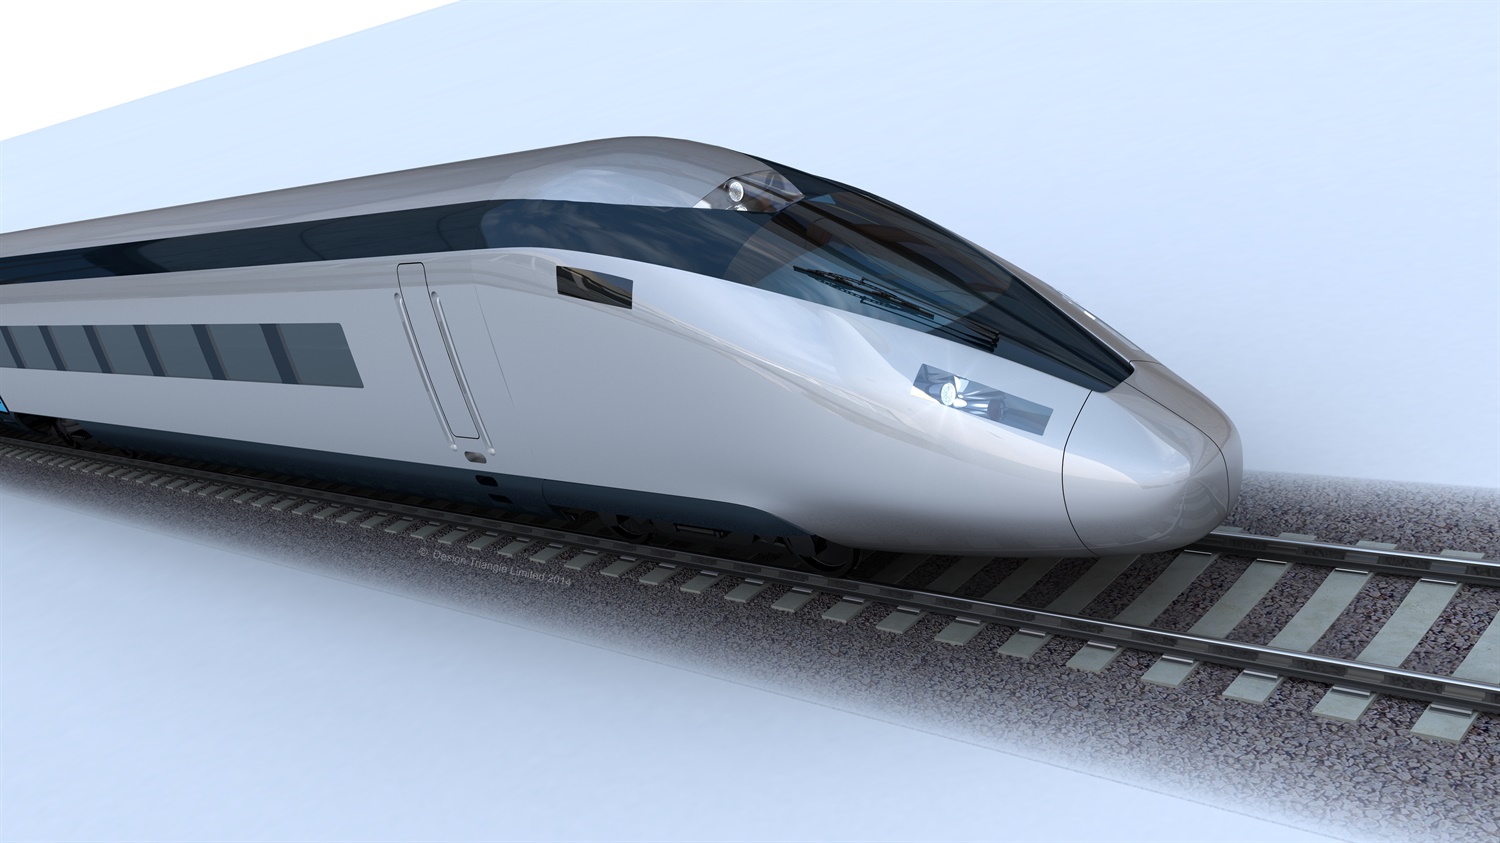 Steve Allen appointed HS2 chief financial officer